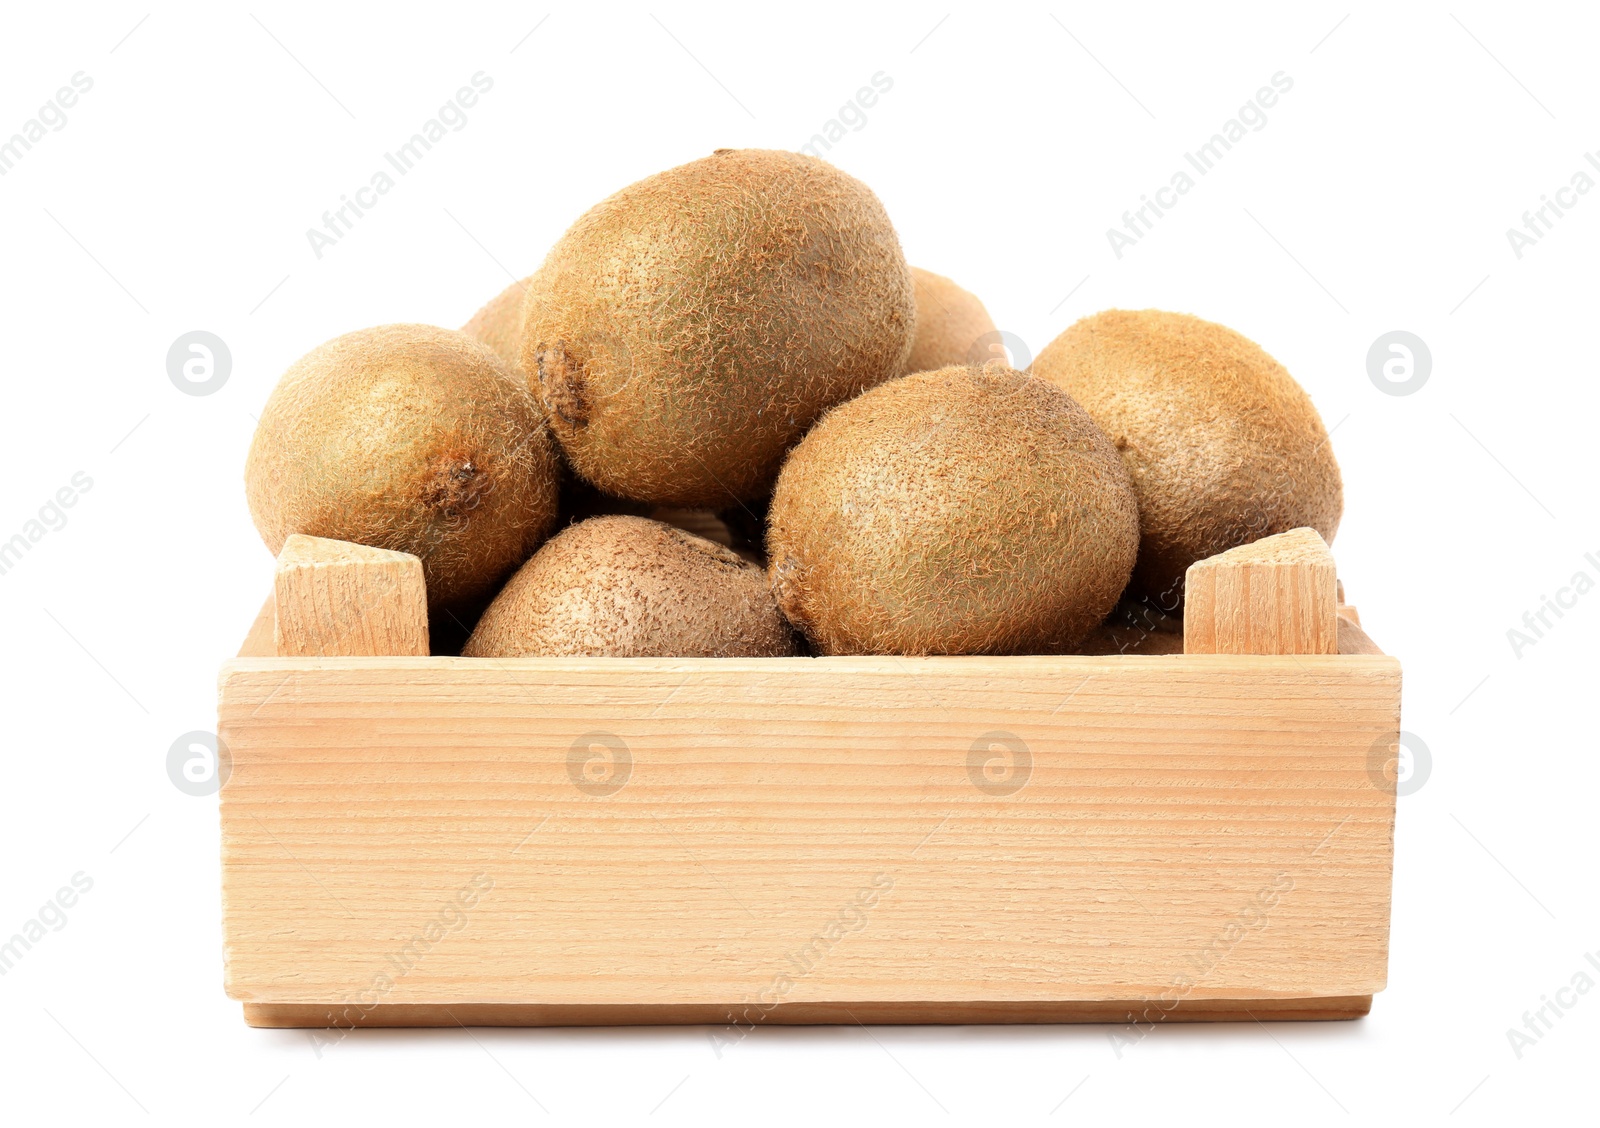 Photo of Whole fresh kiwis in wooden crate isolated on white